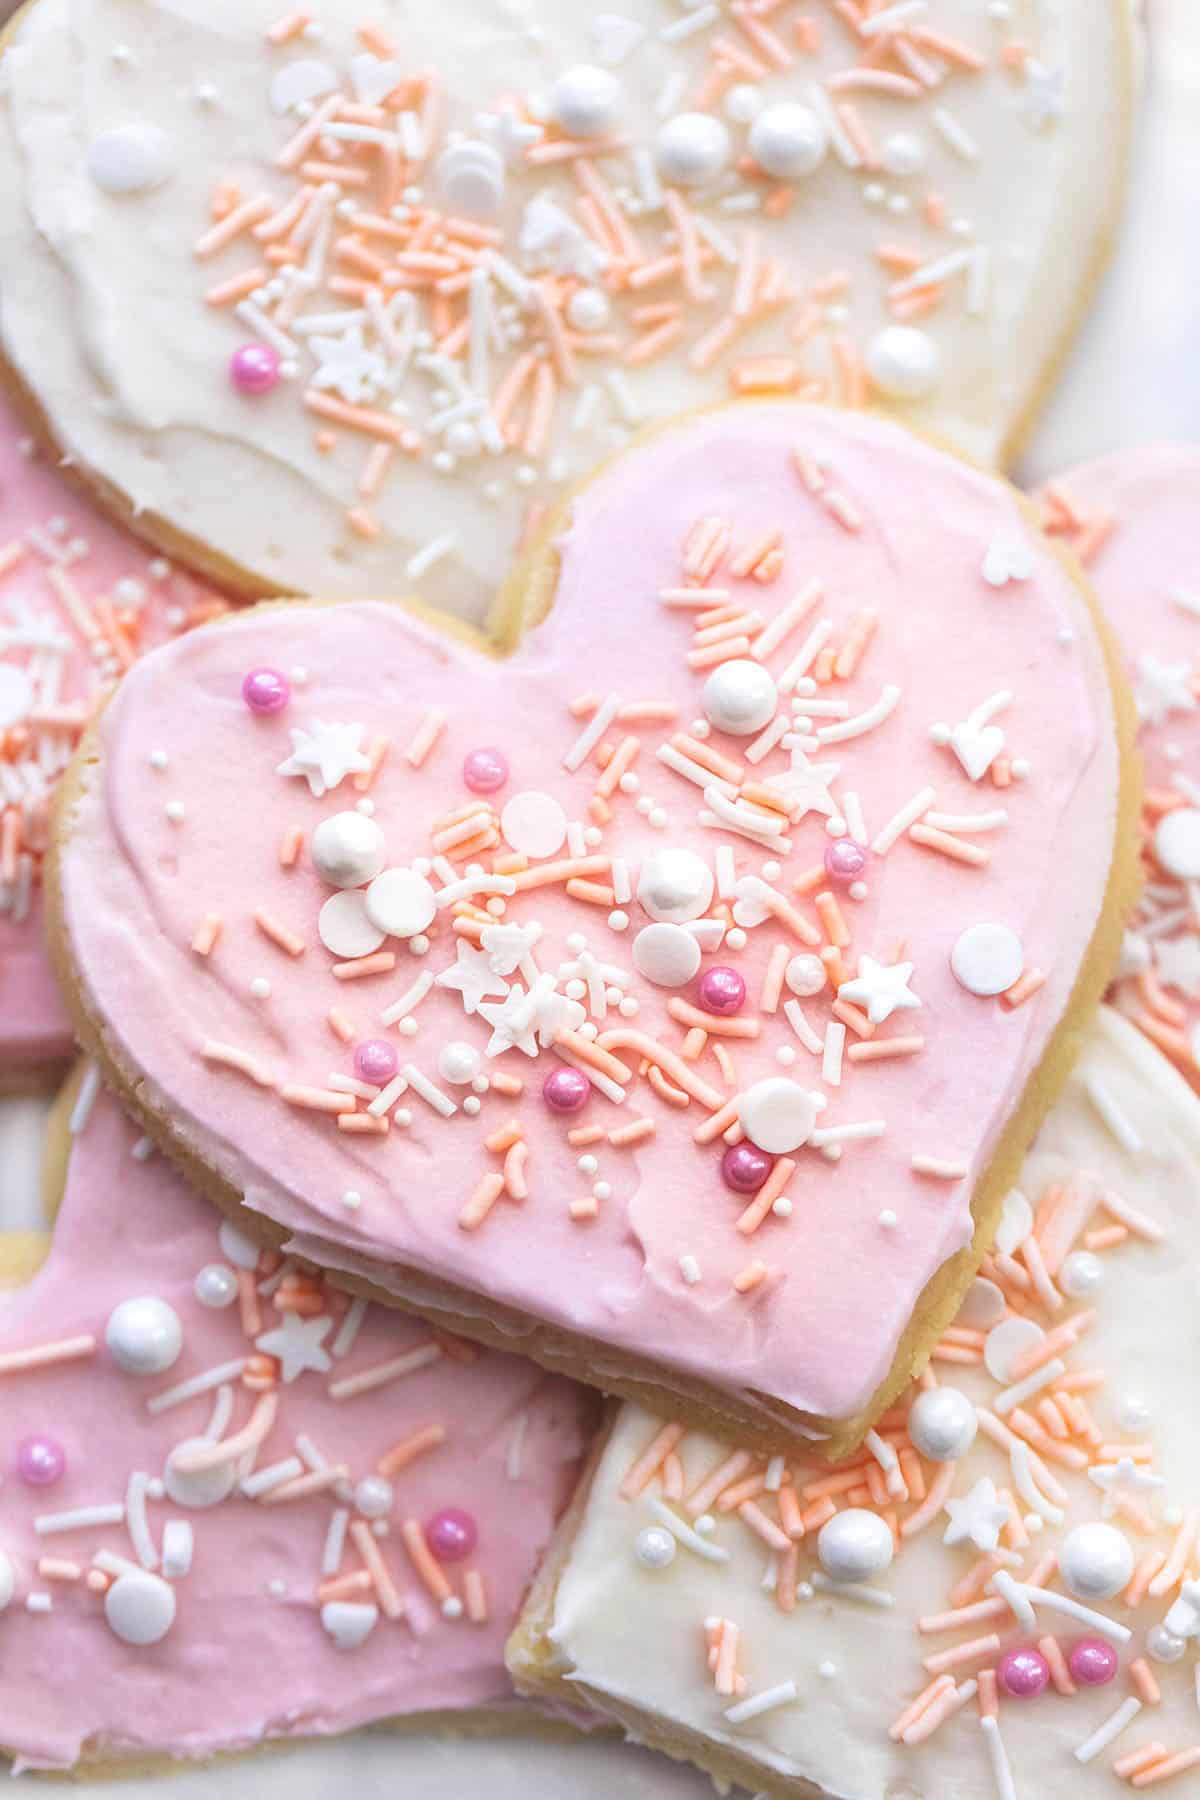 top view of a heart shaped sugar cookie with pink frosting and sprinkles on top of more heart-shaped cookies with pink and white frosting.